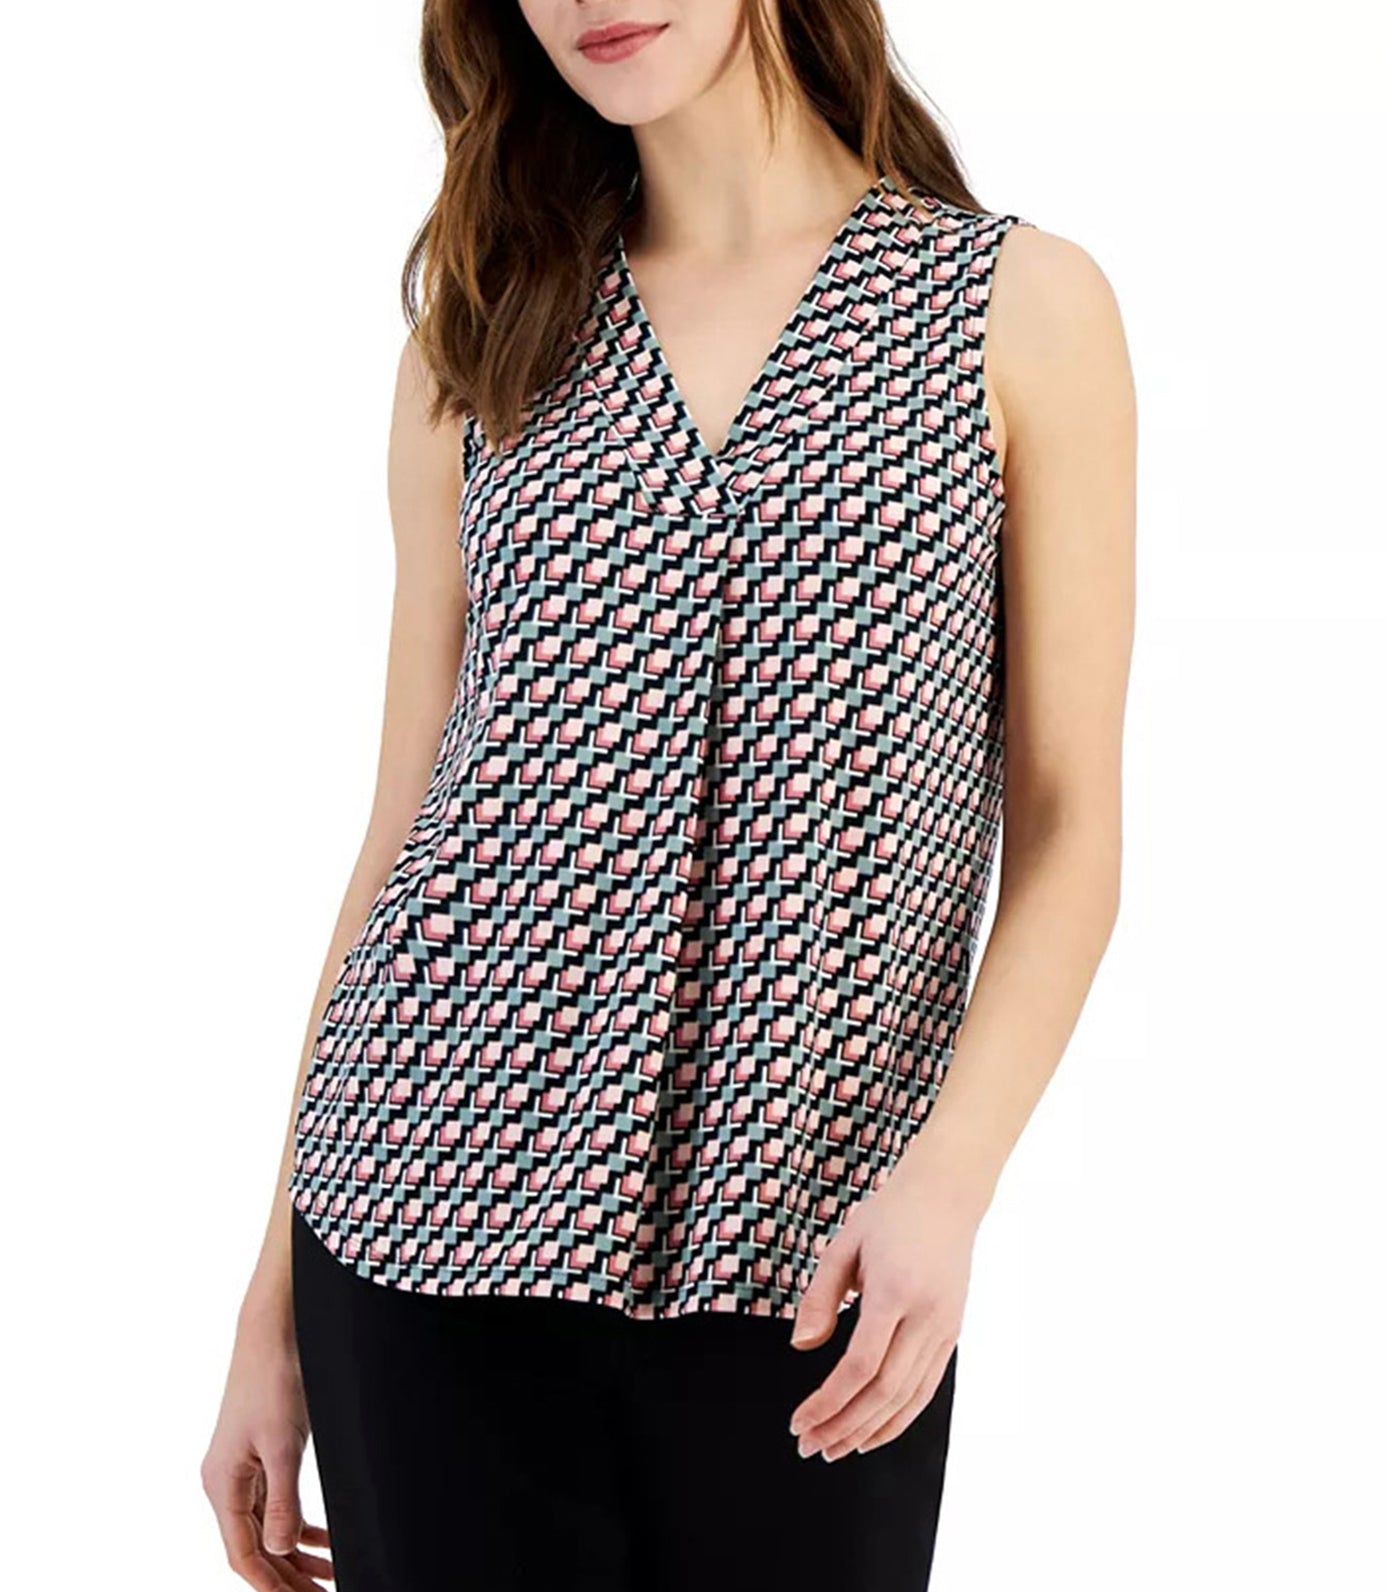 Women's Printed Pleat-Front Sleeveless Top Anne Black/Cherry Blossom